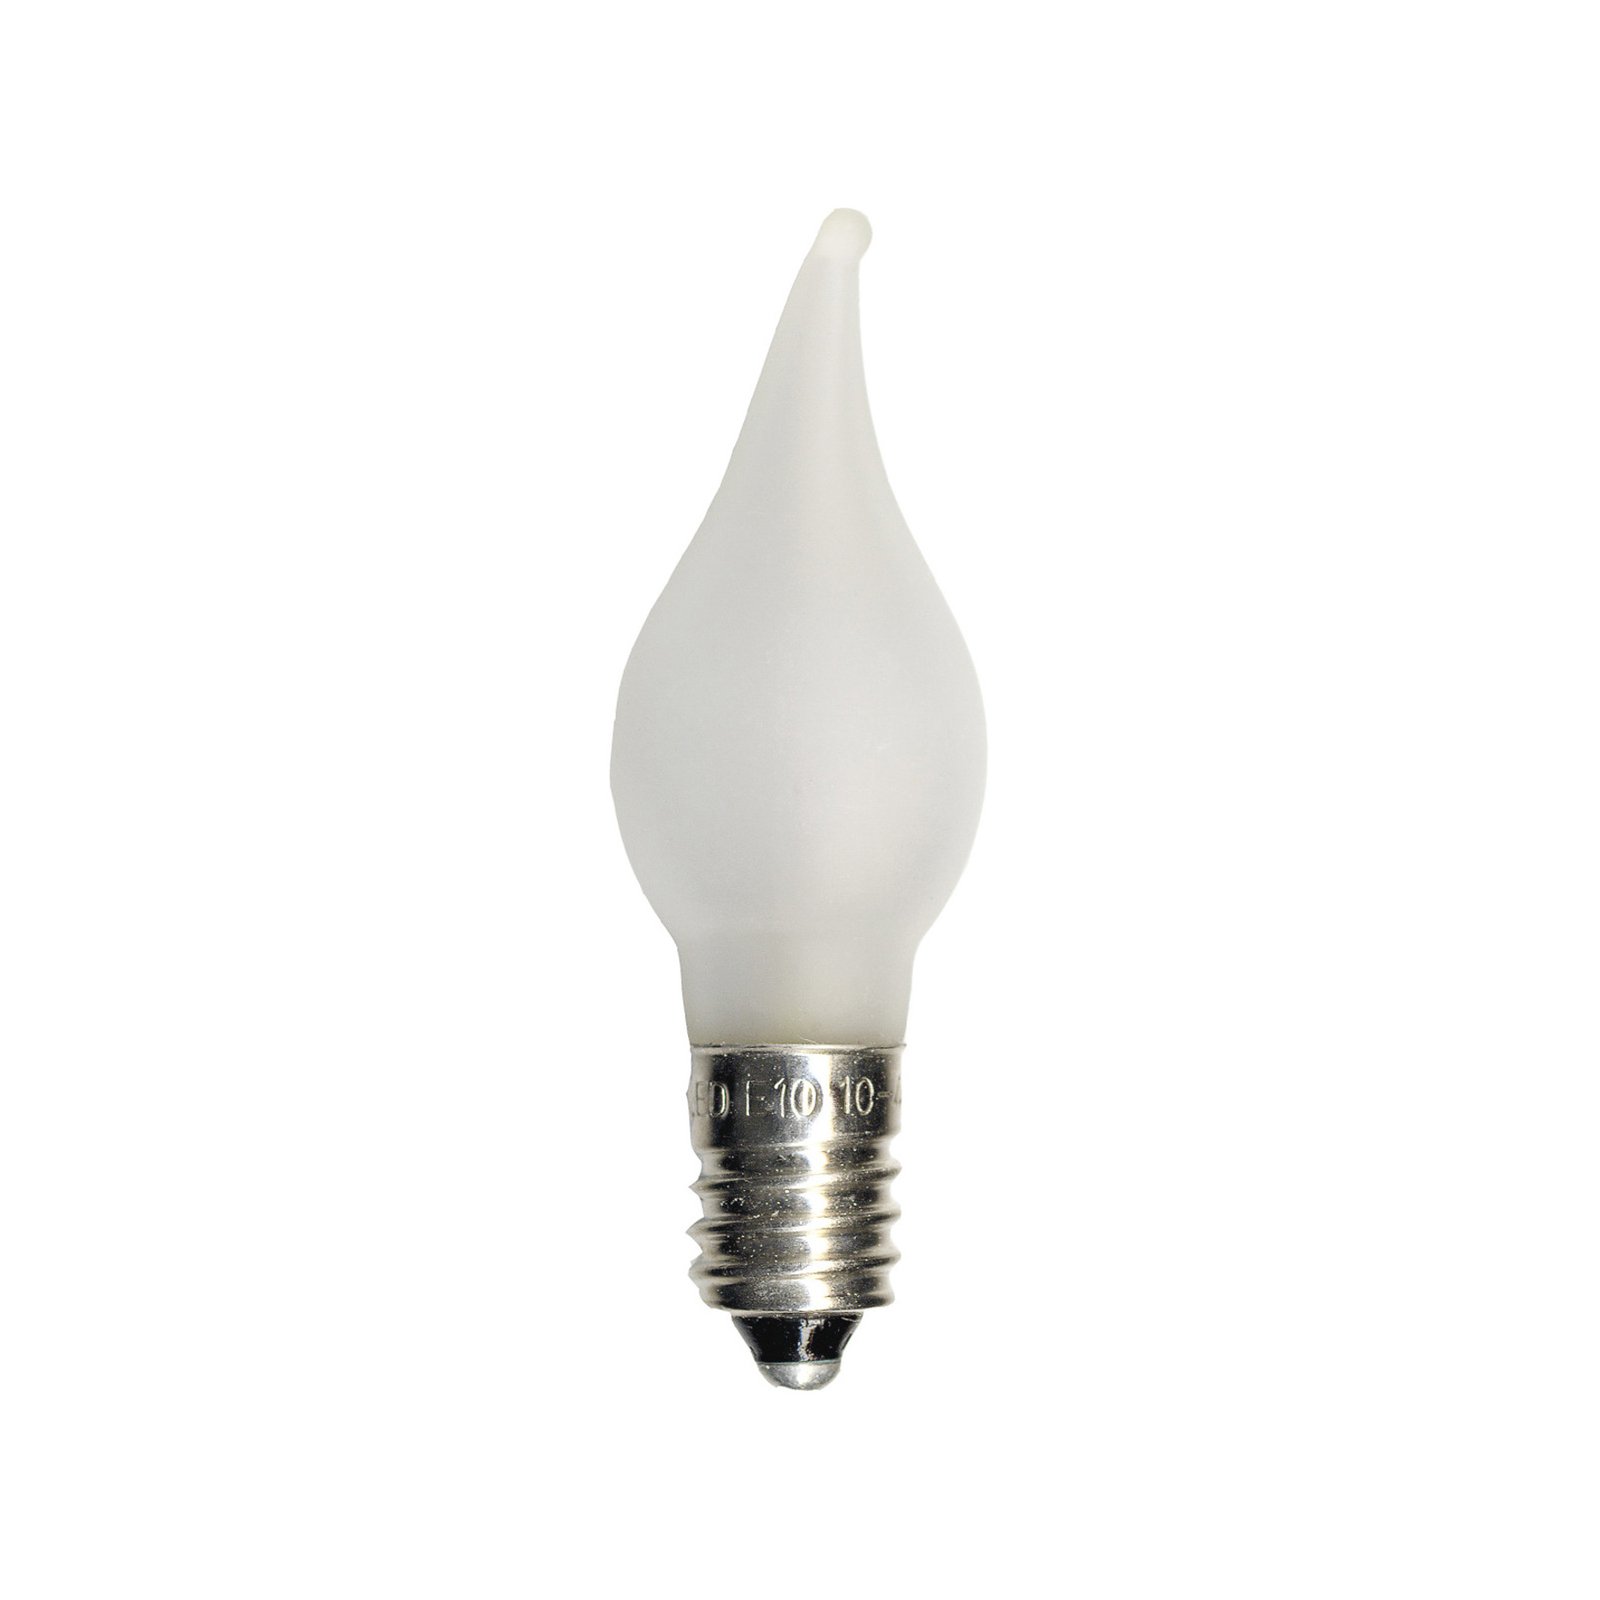 Replacement LED bulb E10 0.2 W 10-55V 3x flame tip